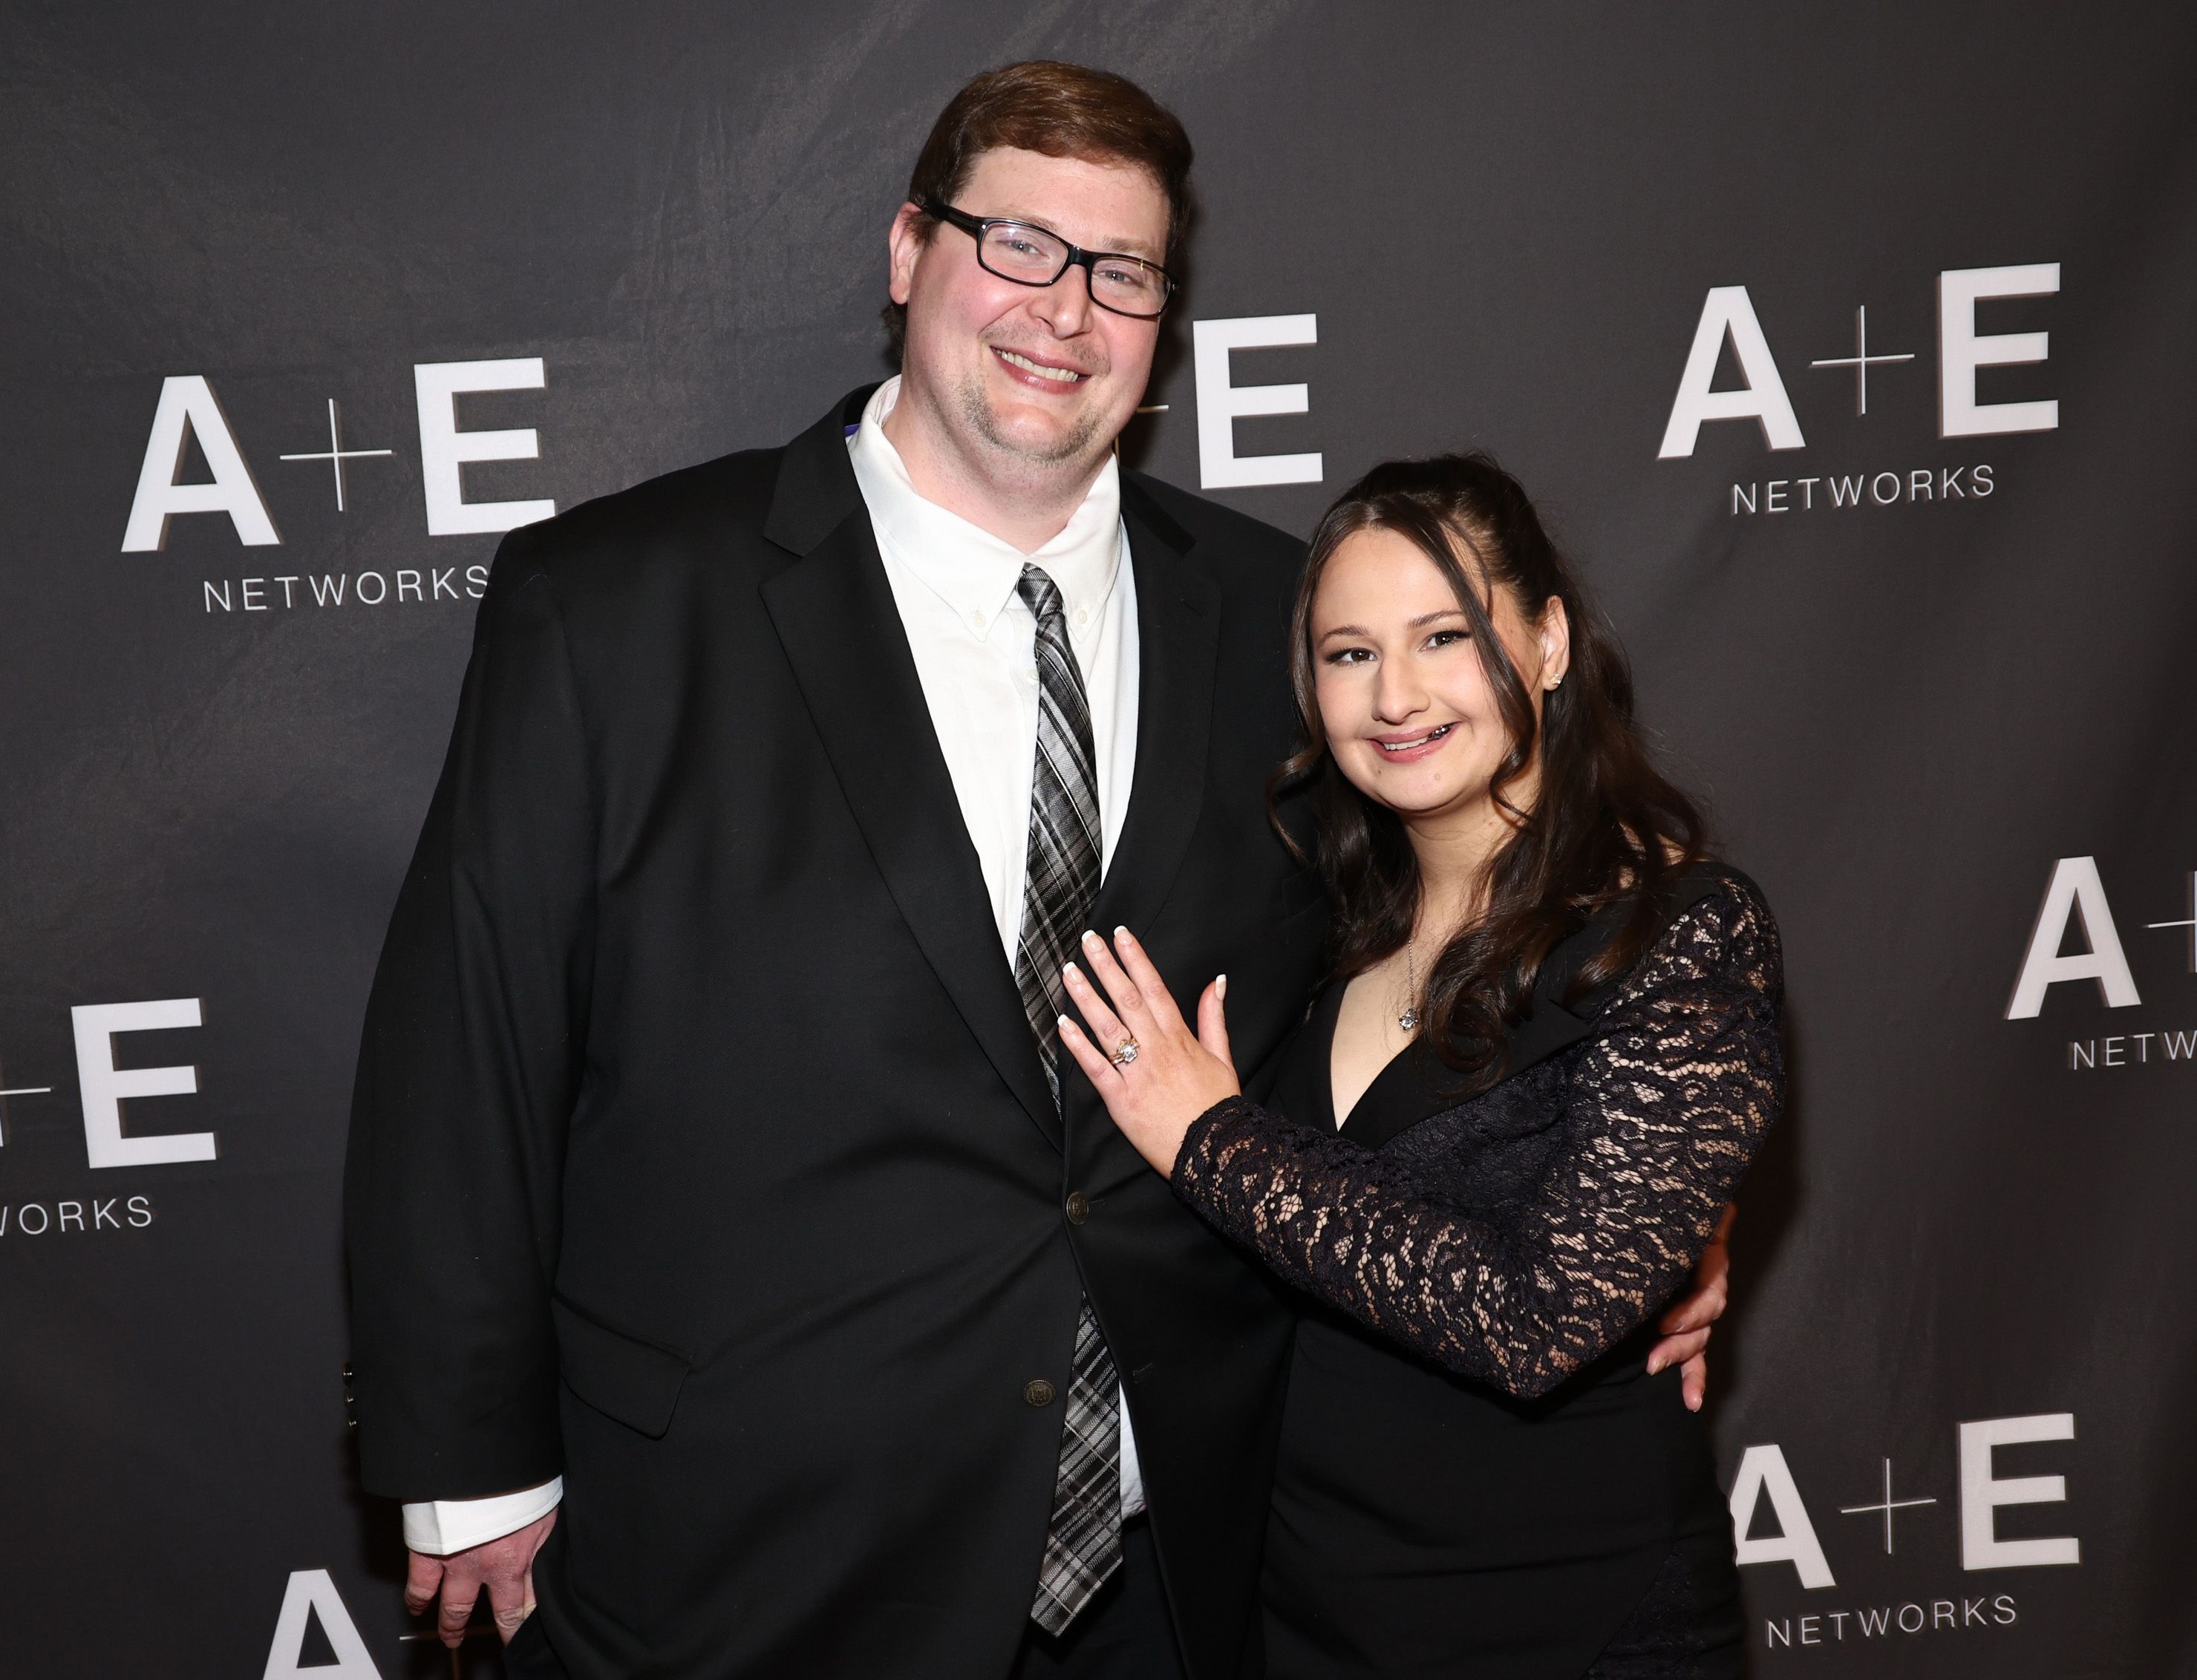 Gypsy Rose Blanchard and Her Husband Are Separating